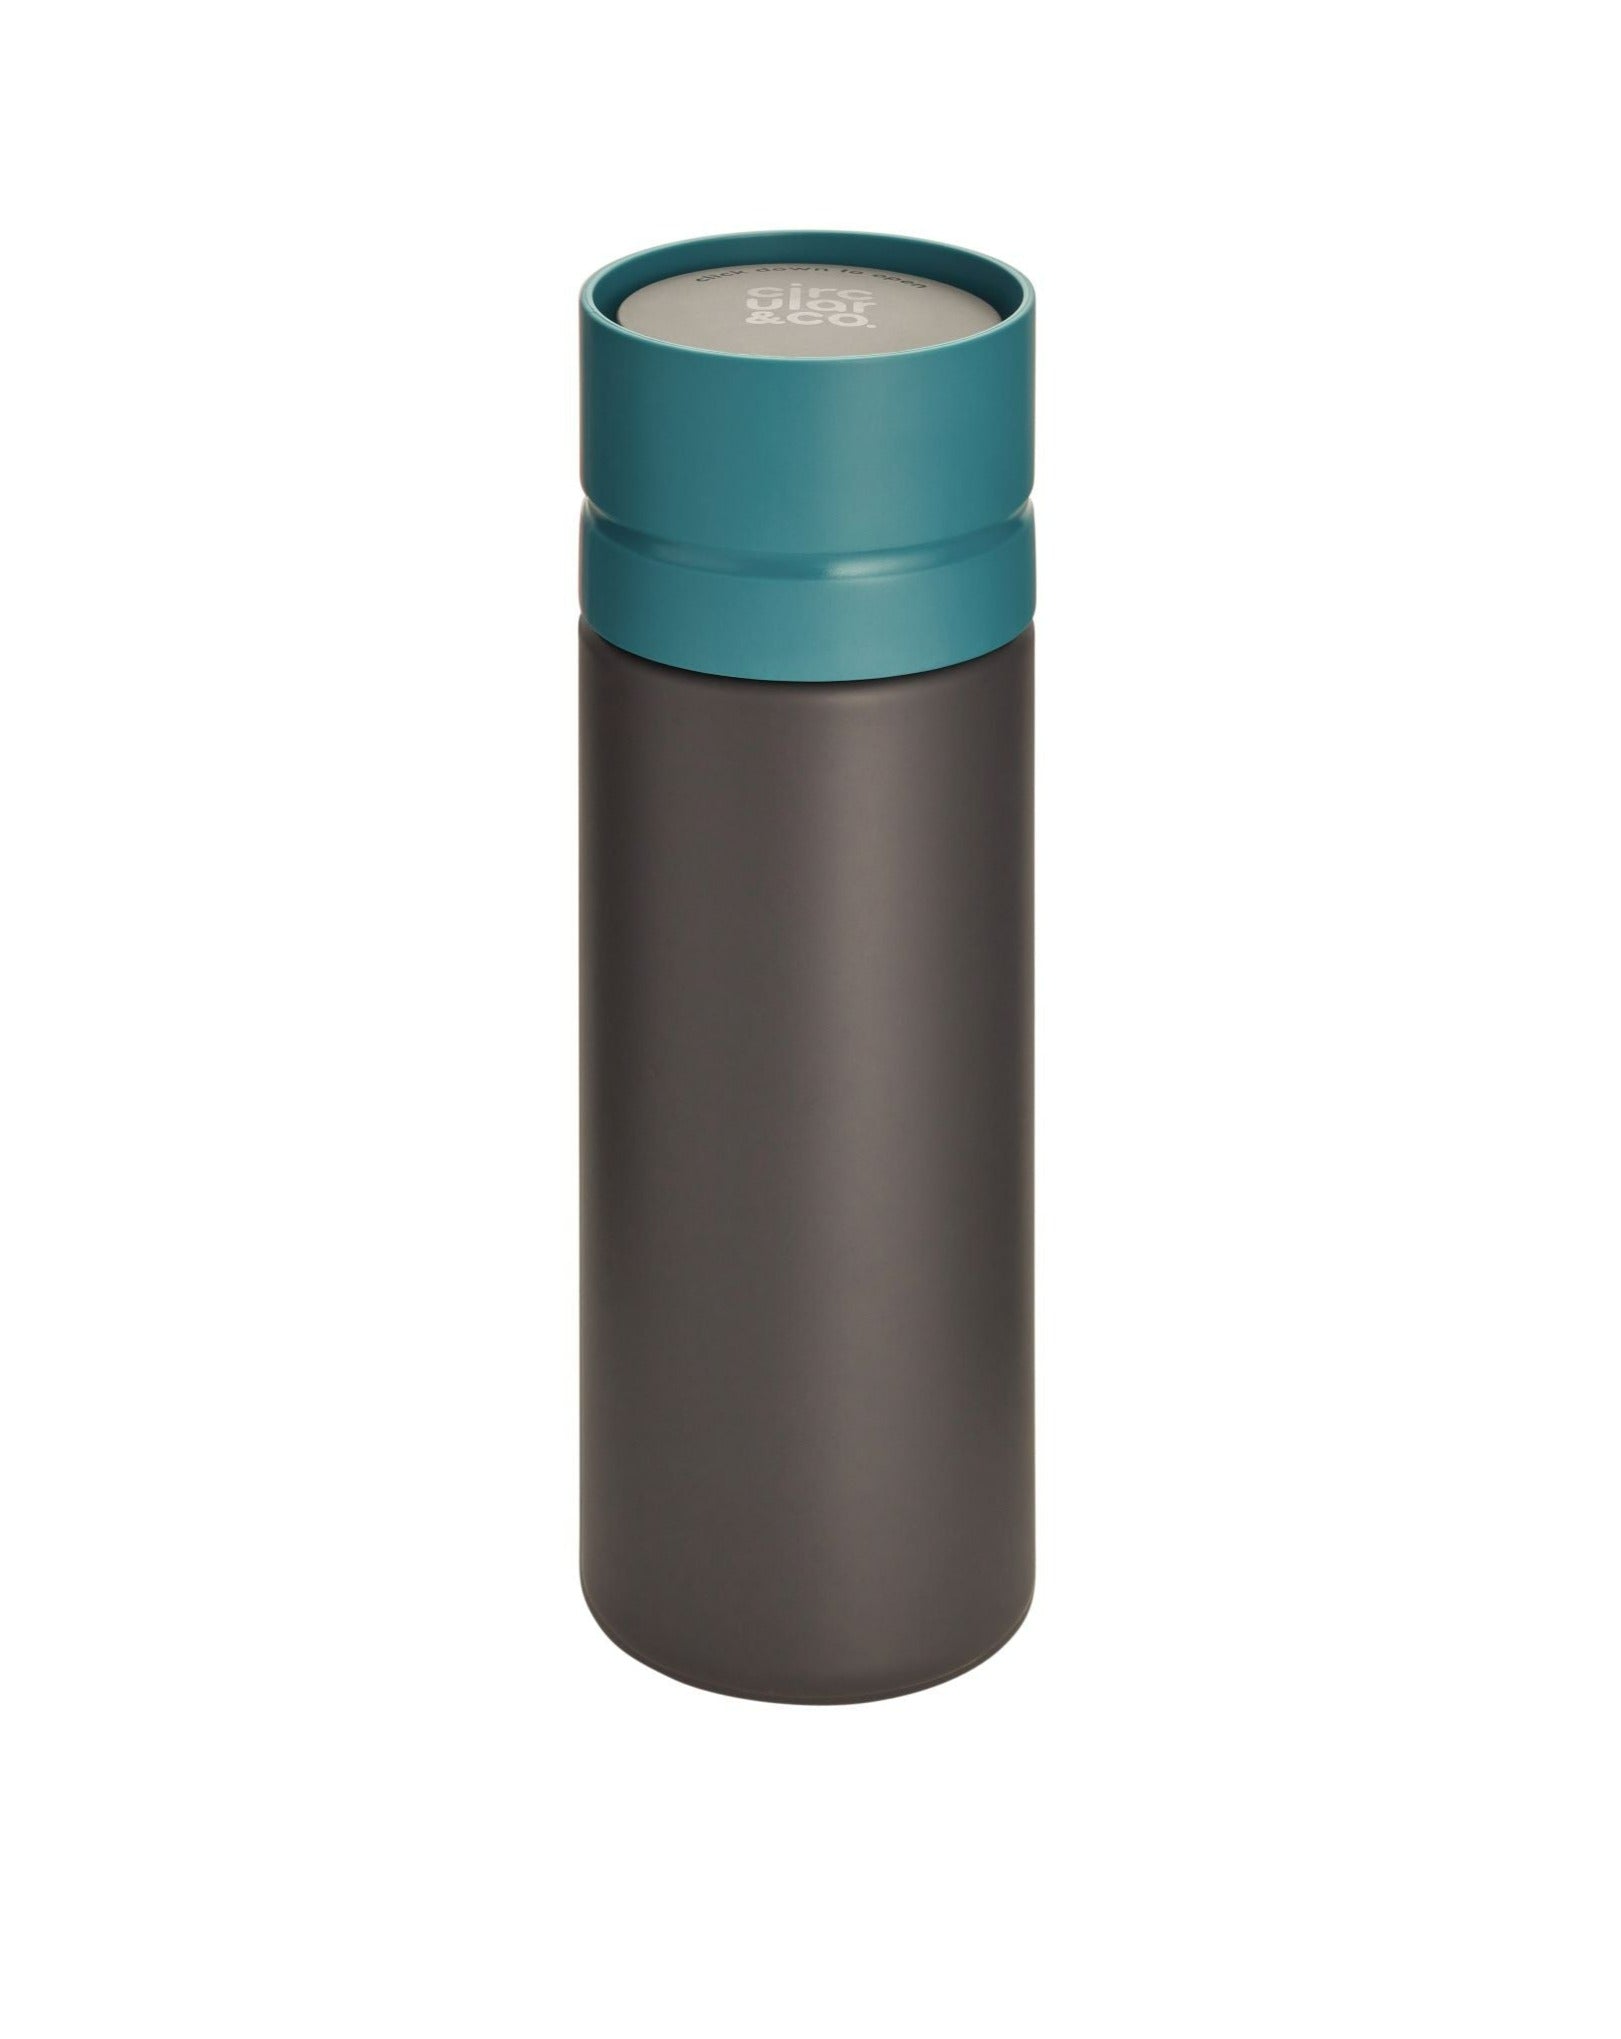 Circular & Co Grey & Teal Sustainable Reusable Water Bottle